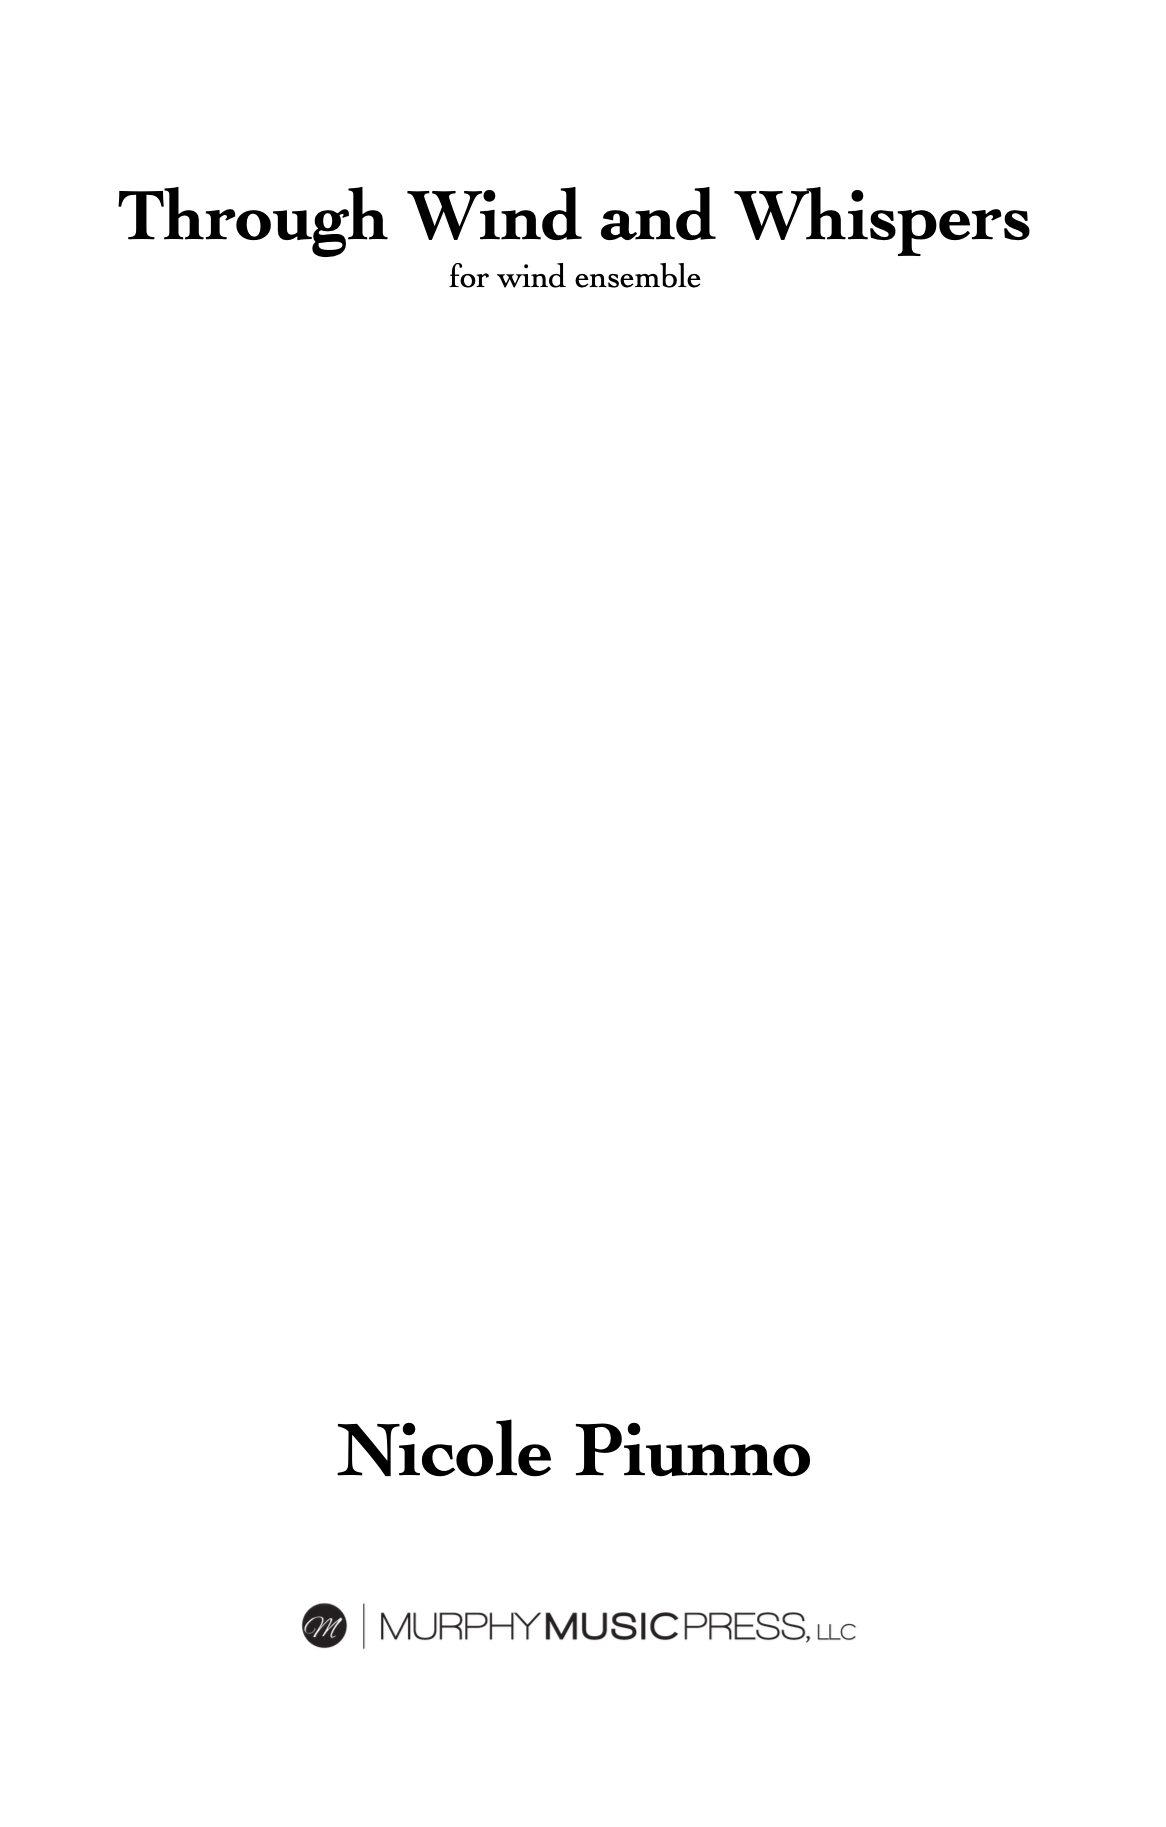 Through Wind And Whispers (Score Only) by Nicole Piunno 